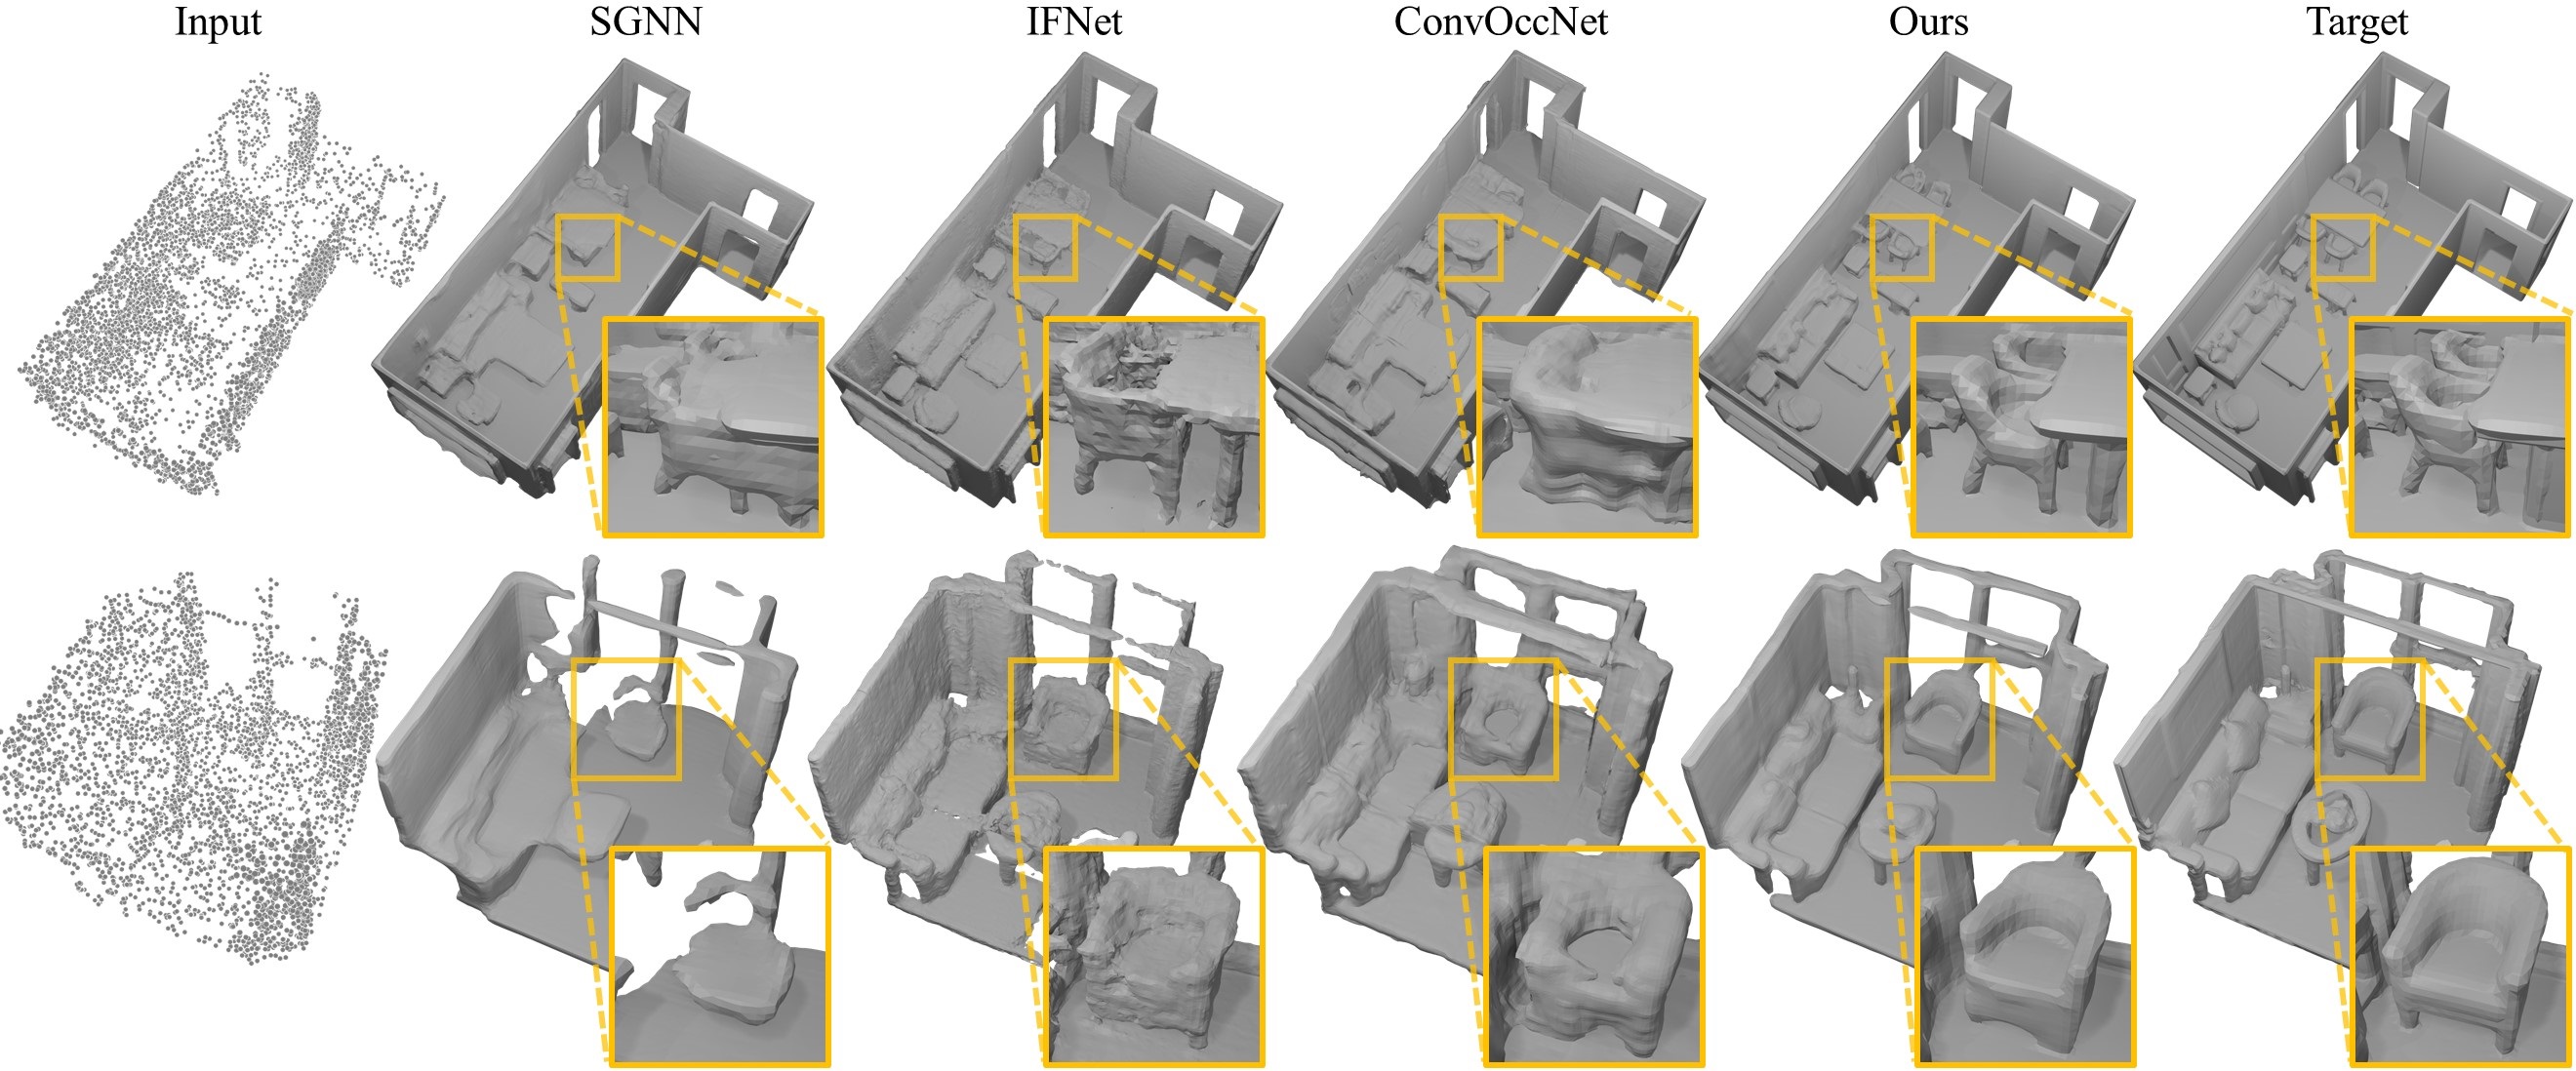 Results (Point cloud to surface reconstruction)|Point cloud to surface reconstruction on 3DFront (top) and Matterport3D (bottom) datasets. Our approach captures more coherent structures and object details.